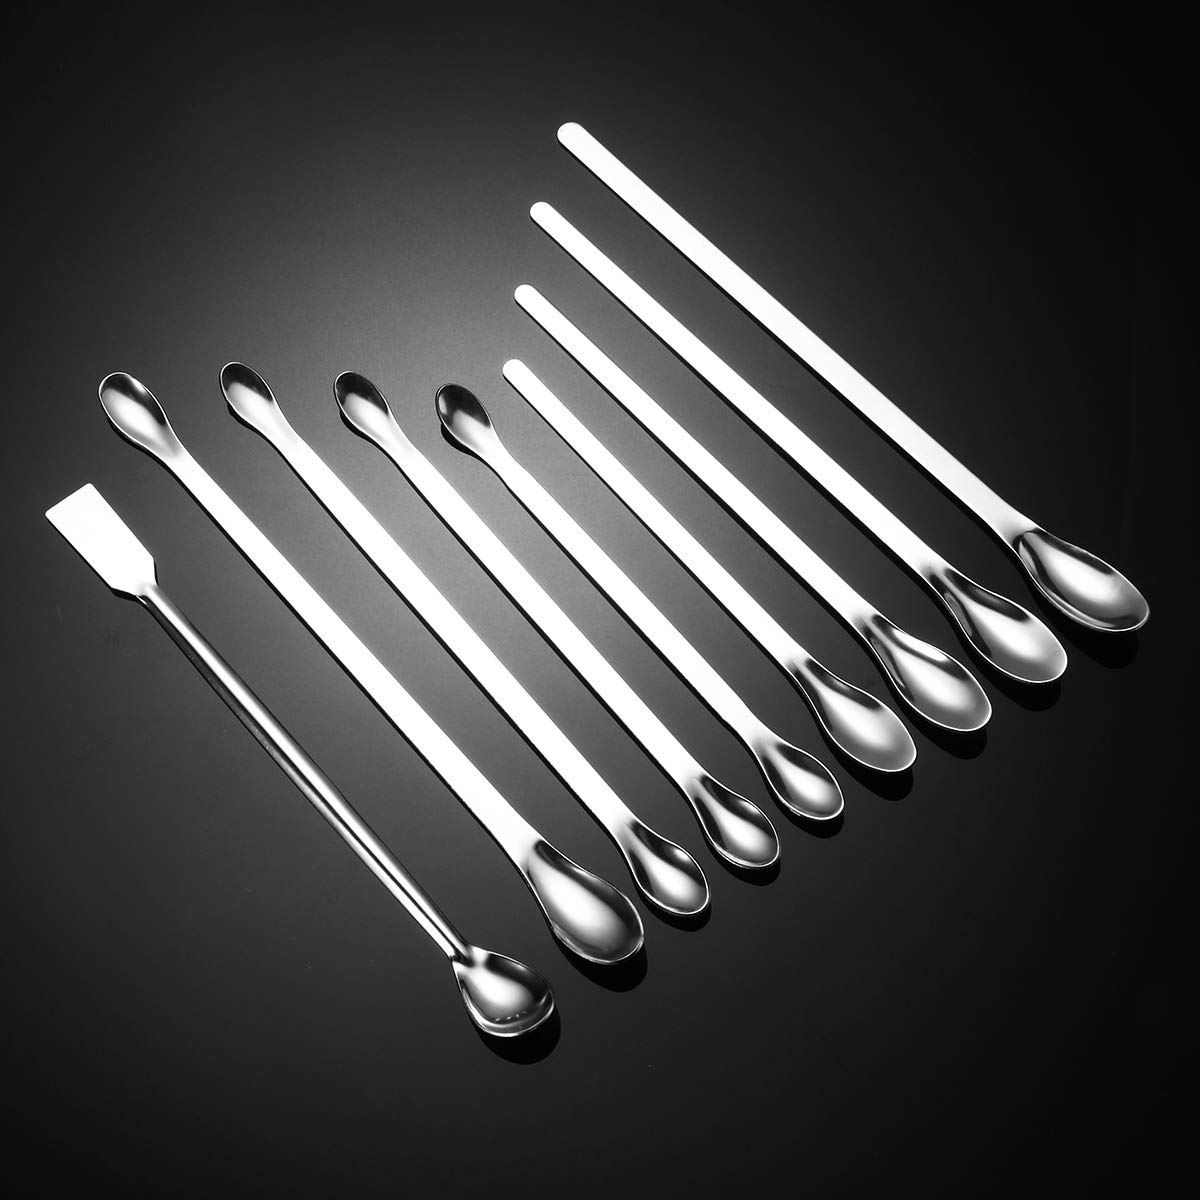 Lab Spatula,9 in 1 Stainless Steel Sampling Spoons Laboratory Scoops - Lab Mixing Spatulas,Length 16/18/20/22CM - e4cents